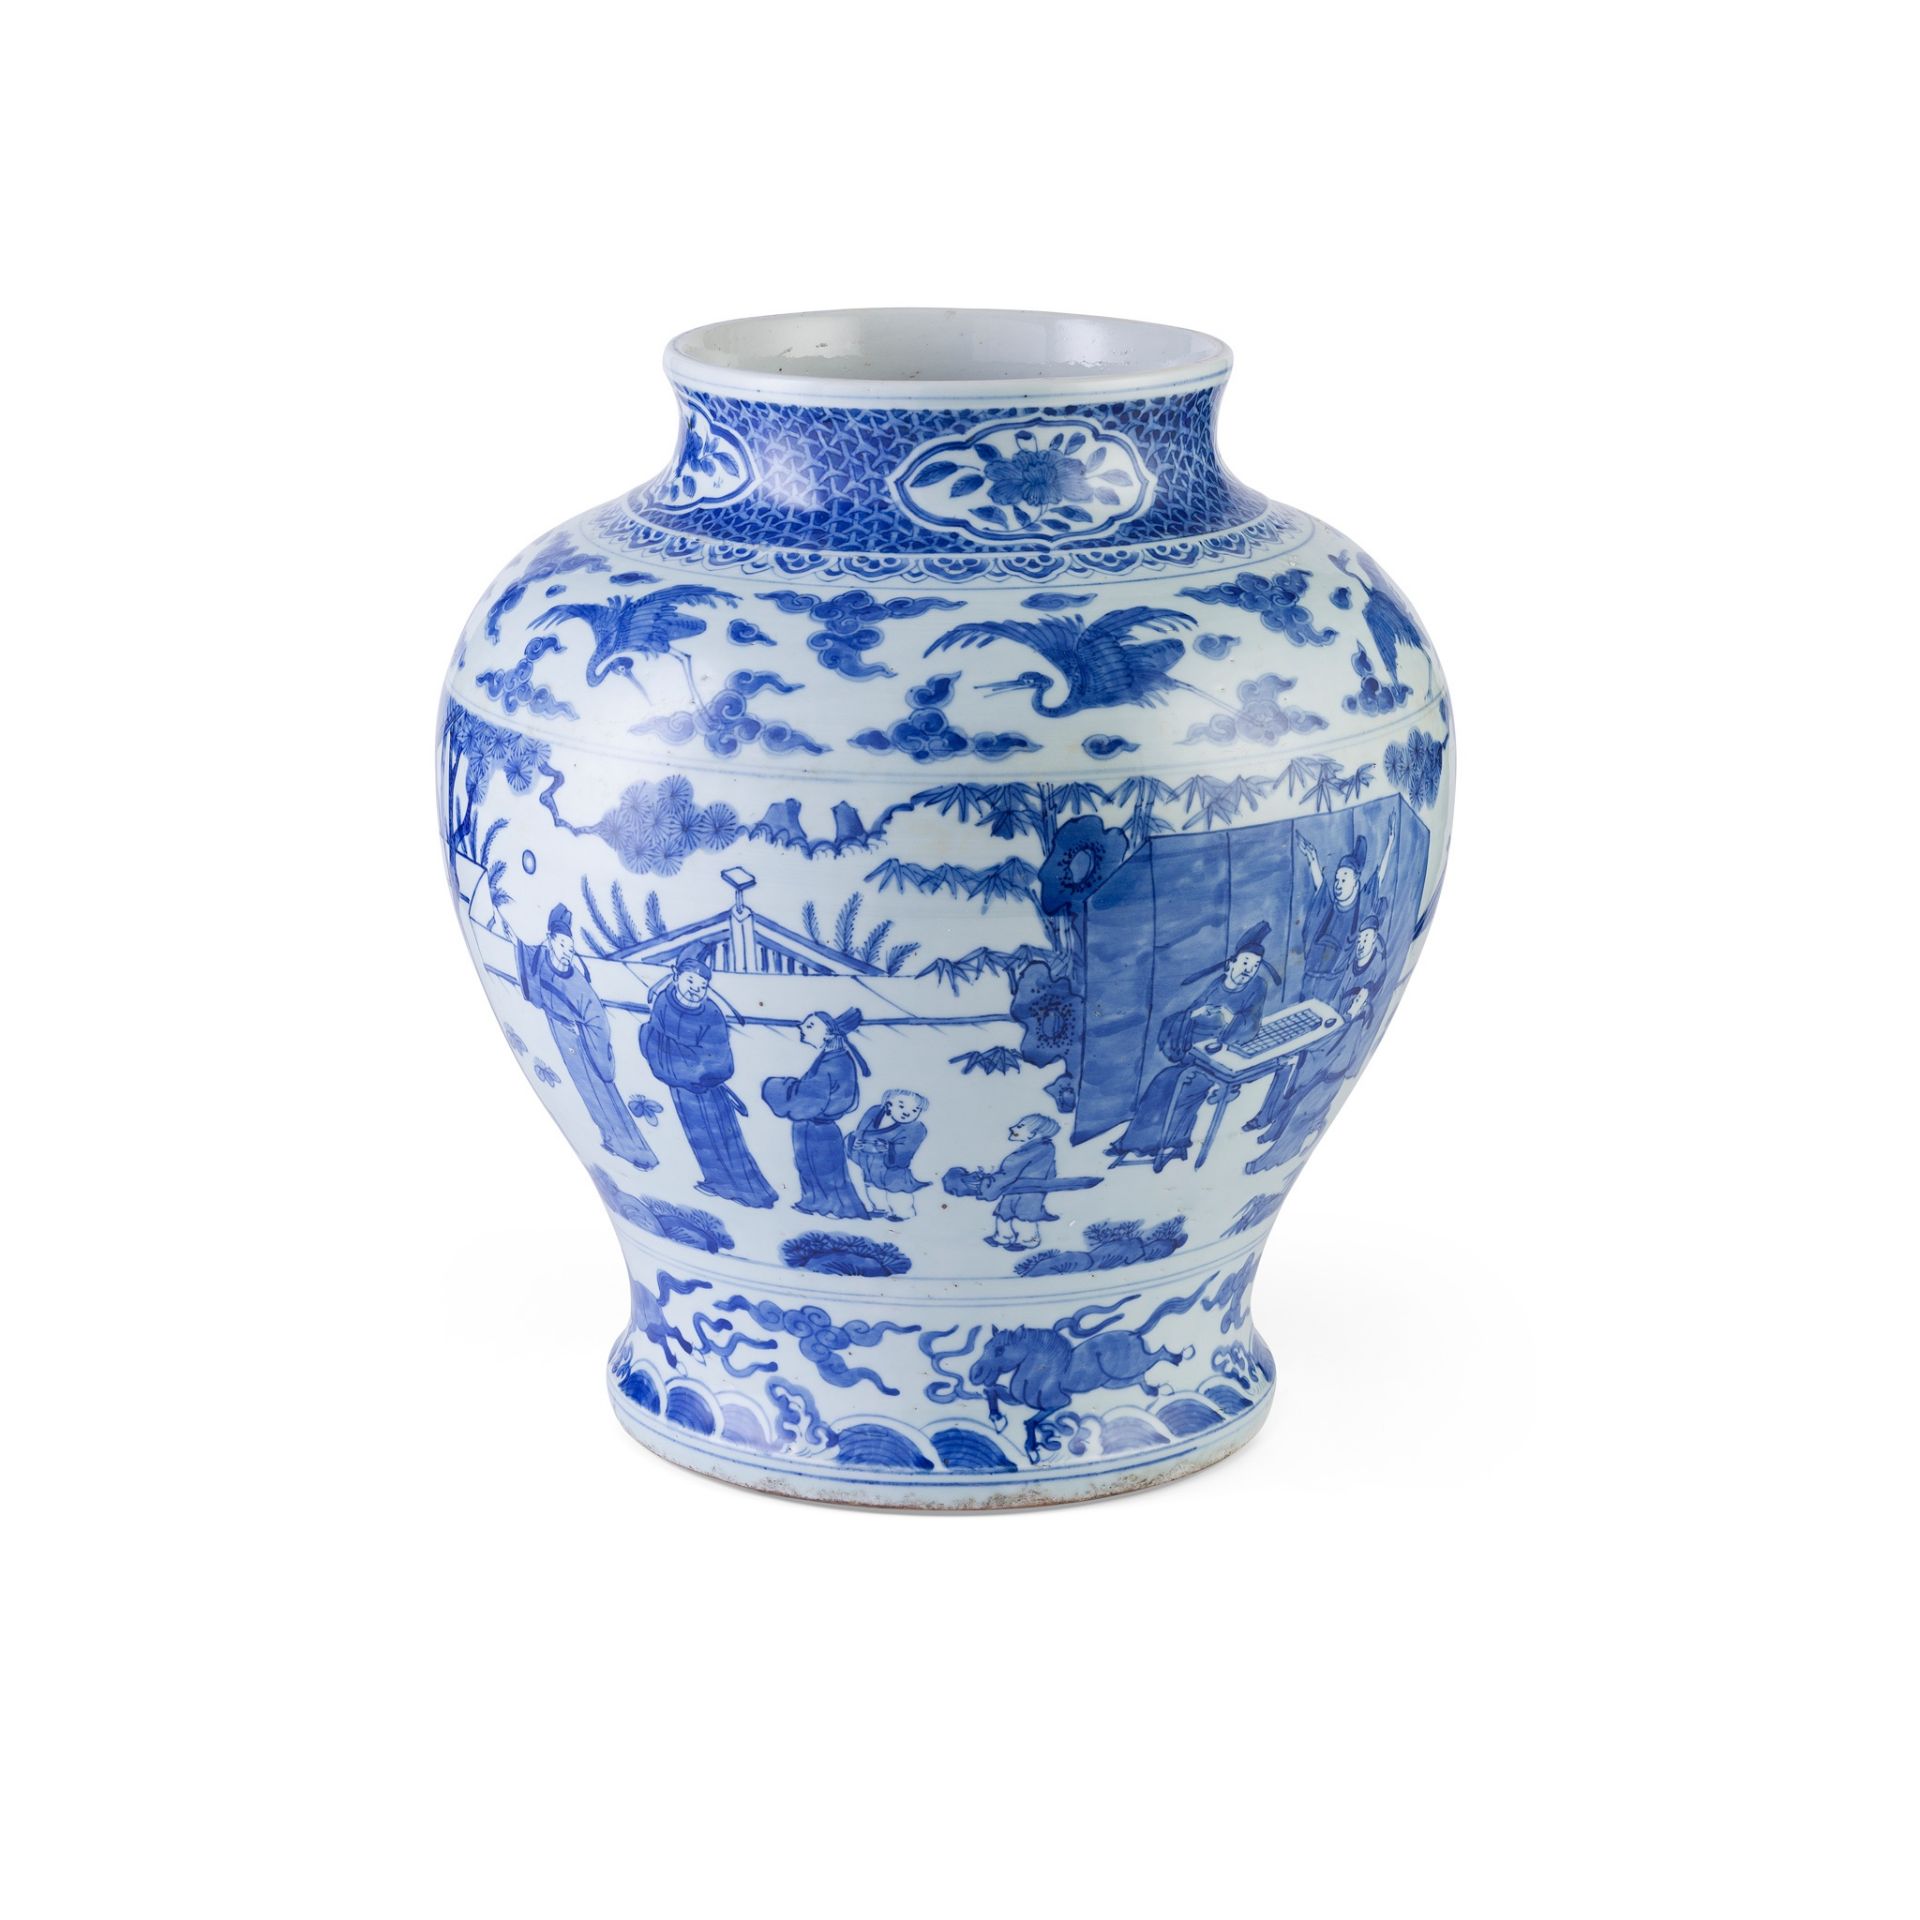 BLUE AND WHITE BALUSTER JAR MING STYLE - Image 2 of 2